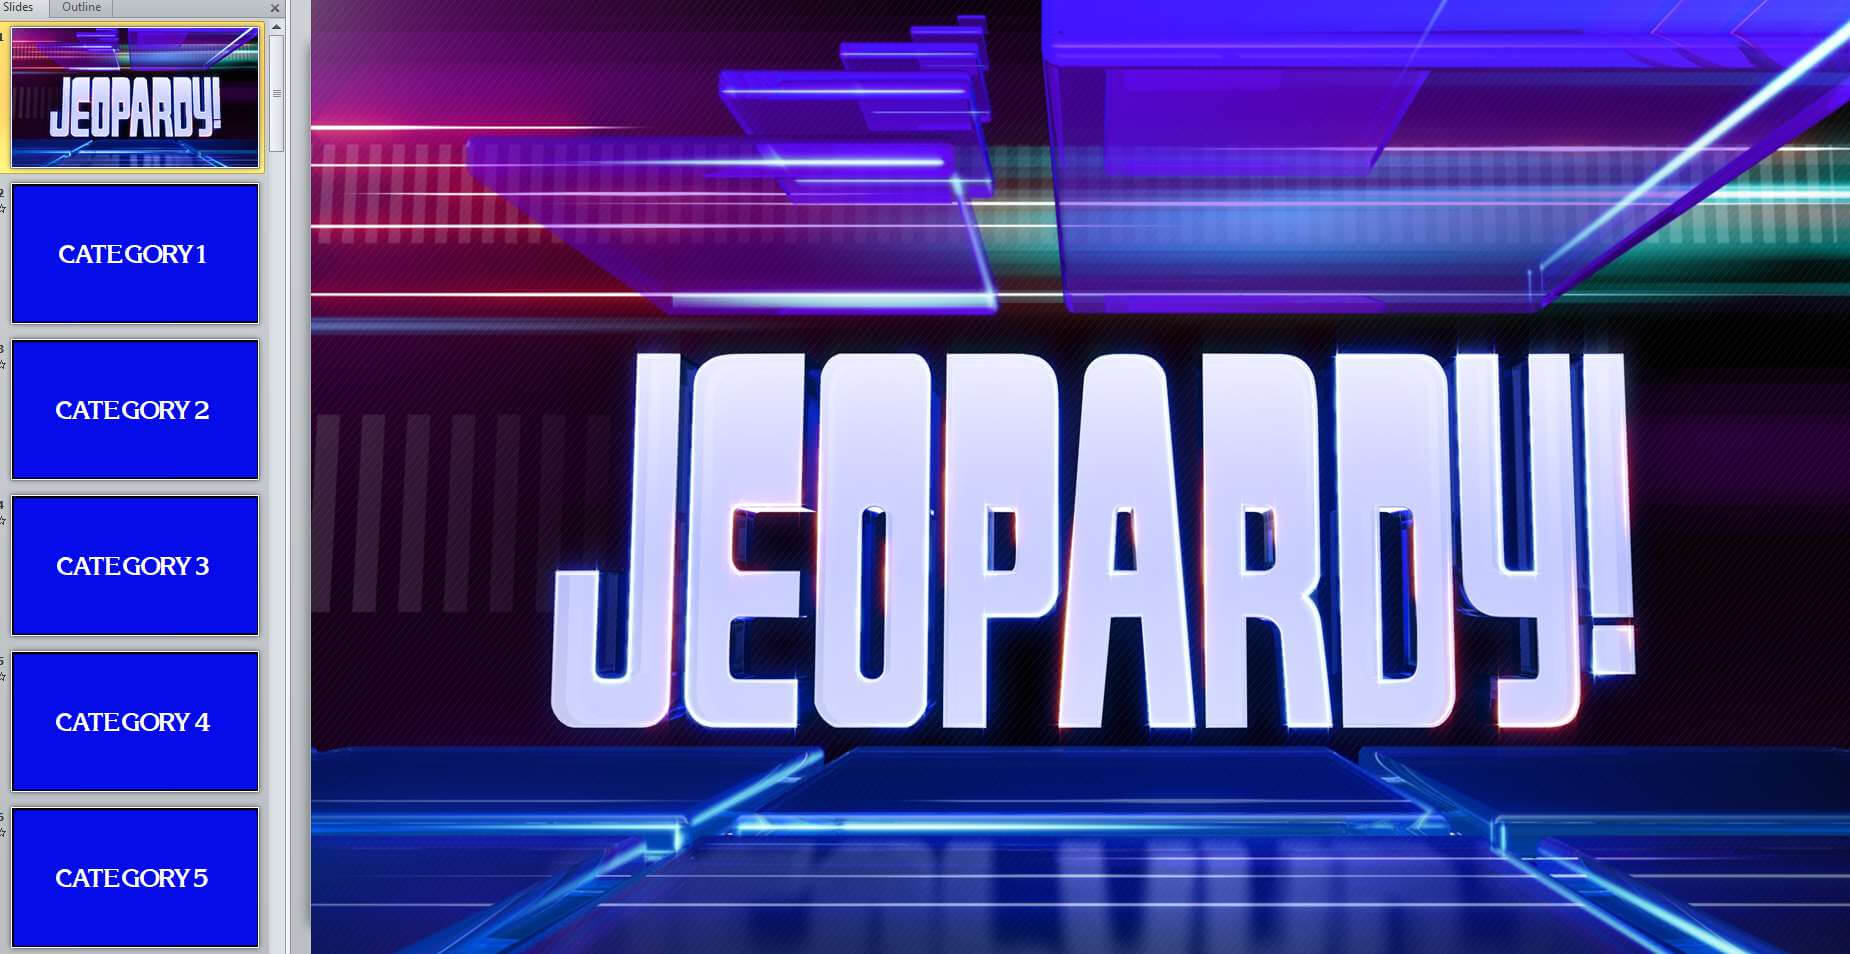 005 Jeopardy Powerpoint Template With Score Jeopardy2 Throughout Jeopardy Powerpoint Template With Sound